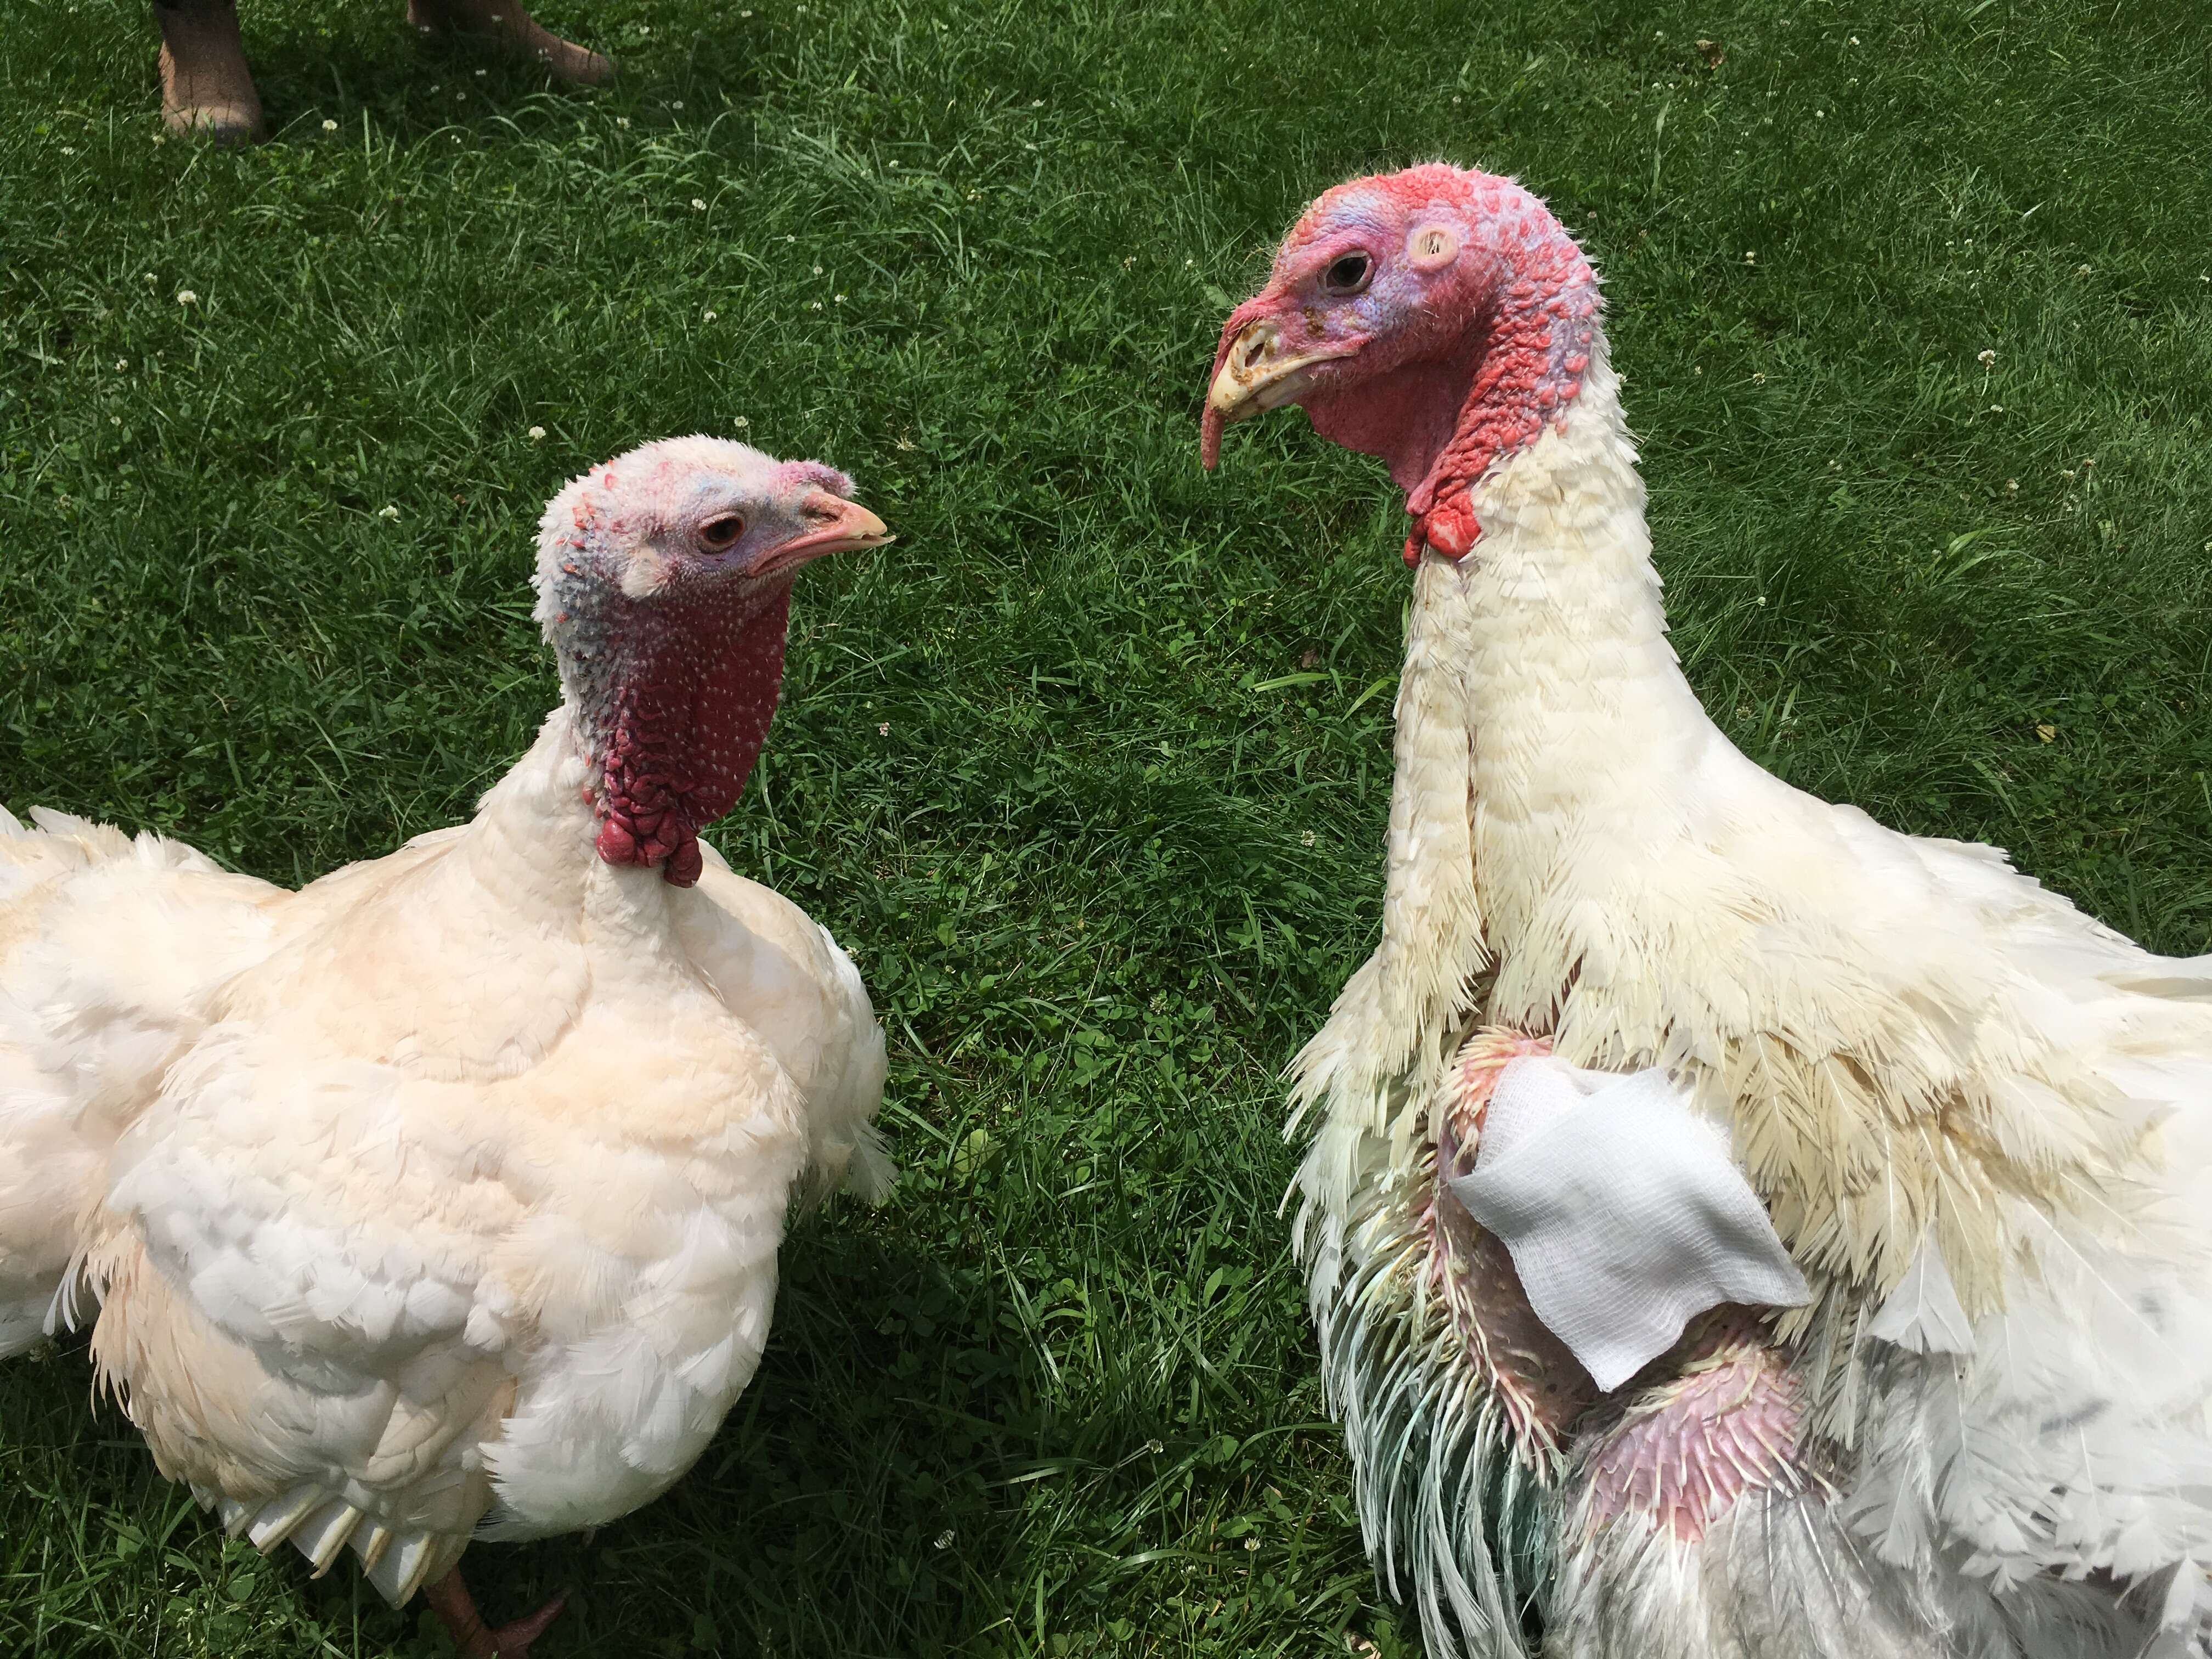 Ivan the turkey who fell from a slaughterhouse truck meets new girlfriend